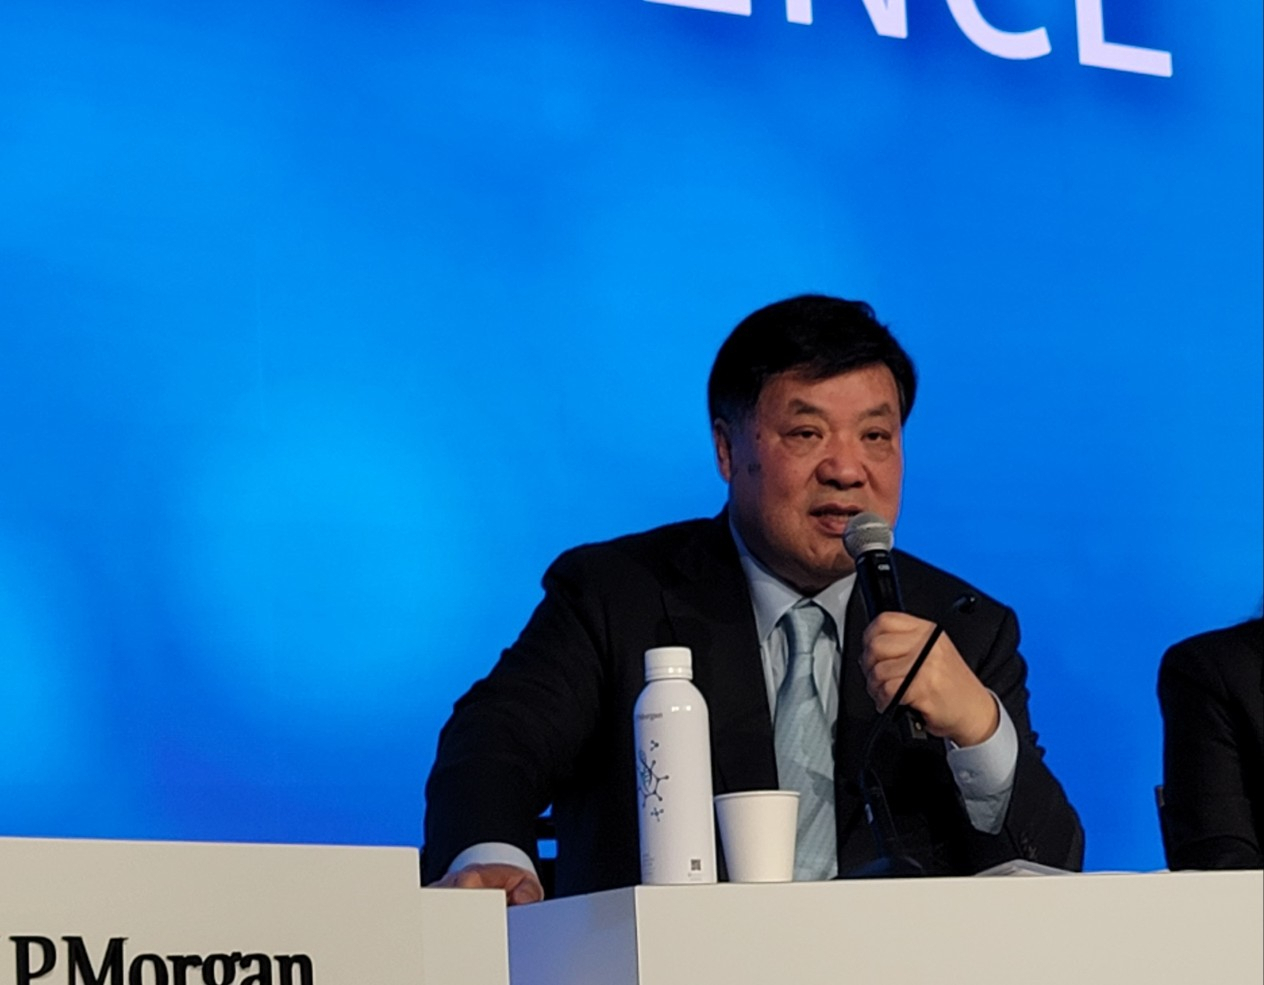 Celltrion Founder and Chairman Seo Jung-jin speaks at the J.P. Morgan Healthcare Conference in San Francisco, Wednesday. (Celltrion)